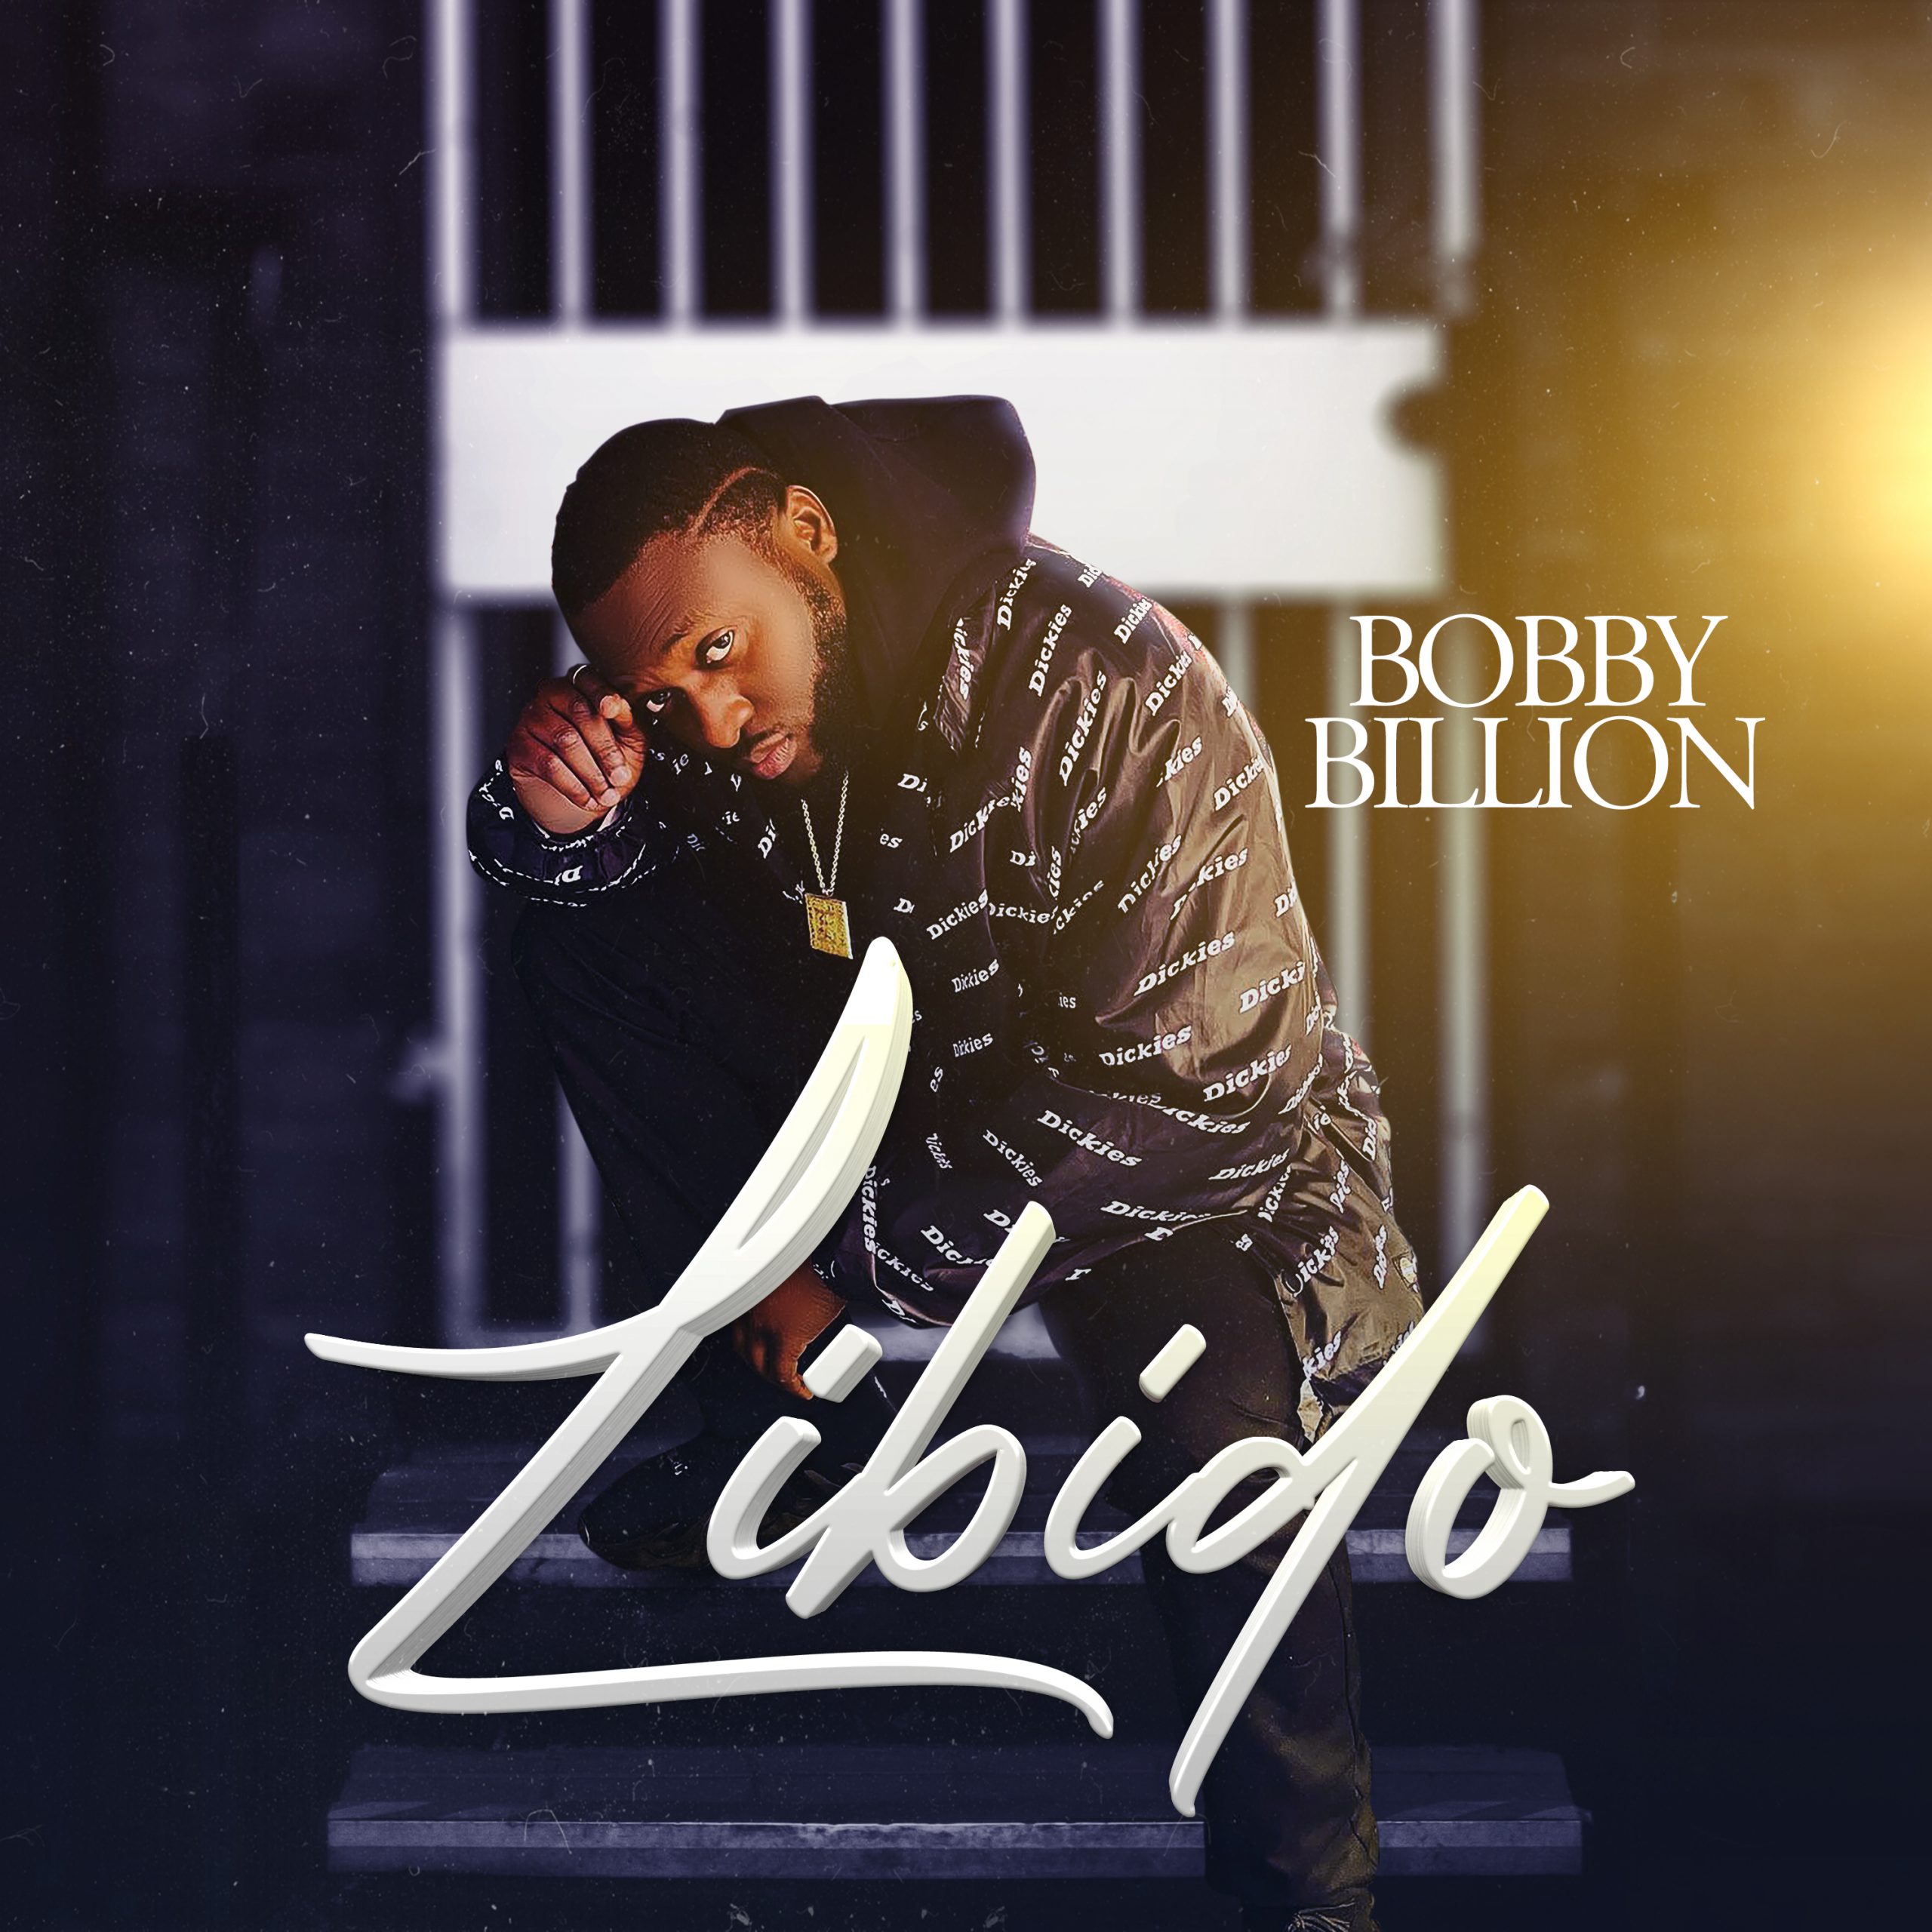 ‘Bobby Billion’ is undoubtedly one of the few upcoming afrobeat artists with a unique style as he drops ‘Libido’.